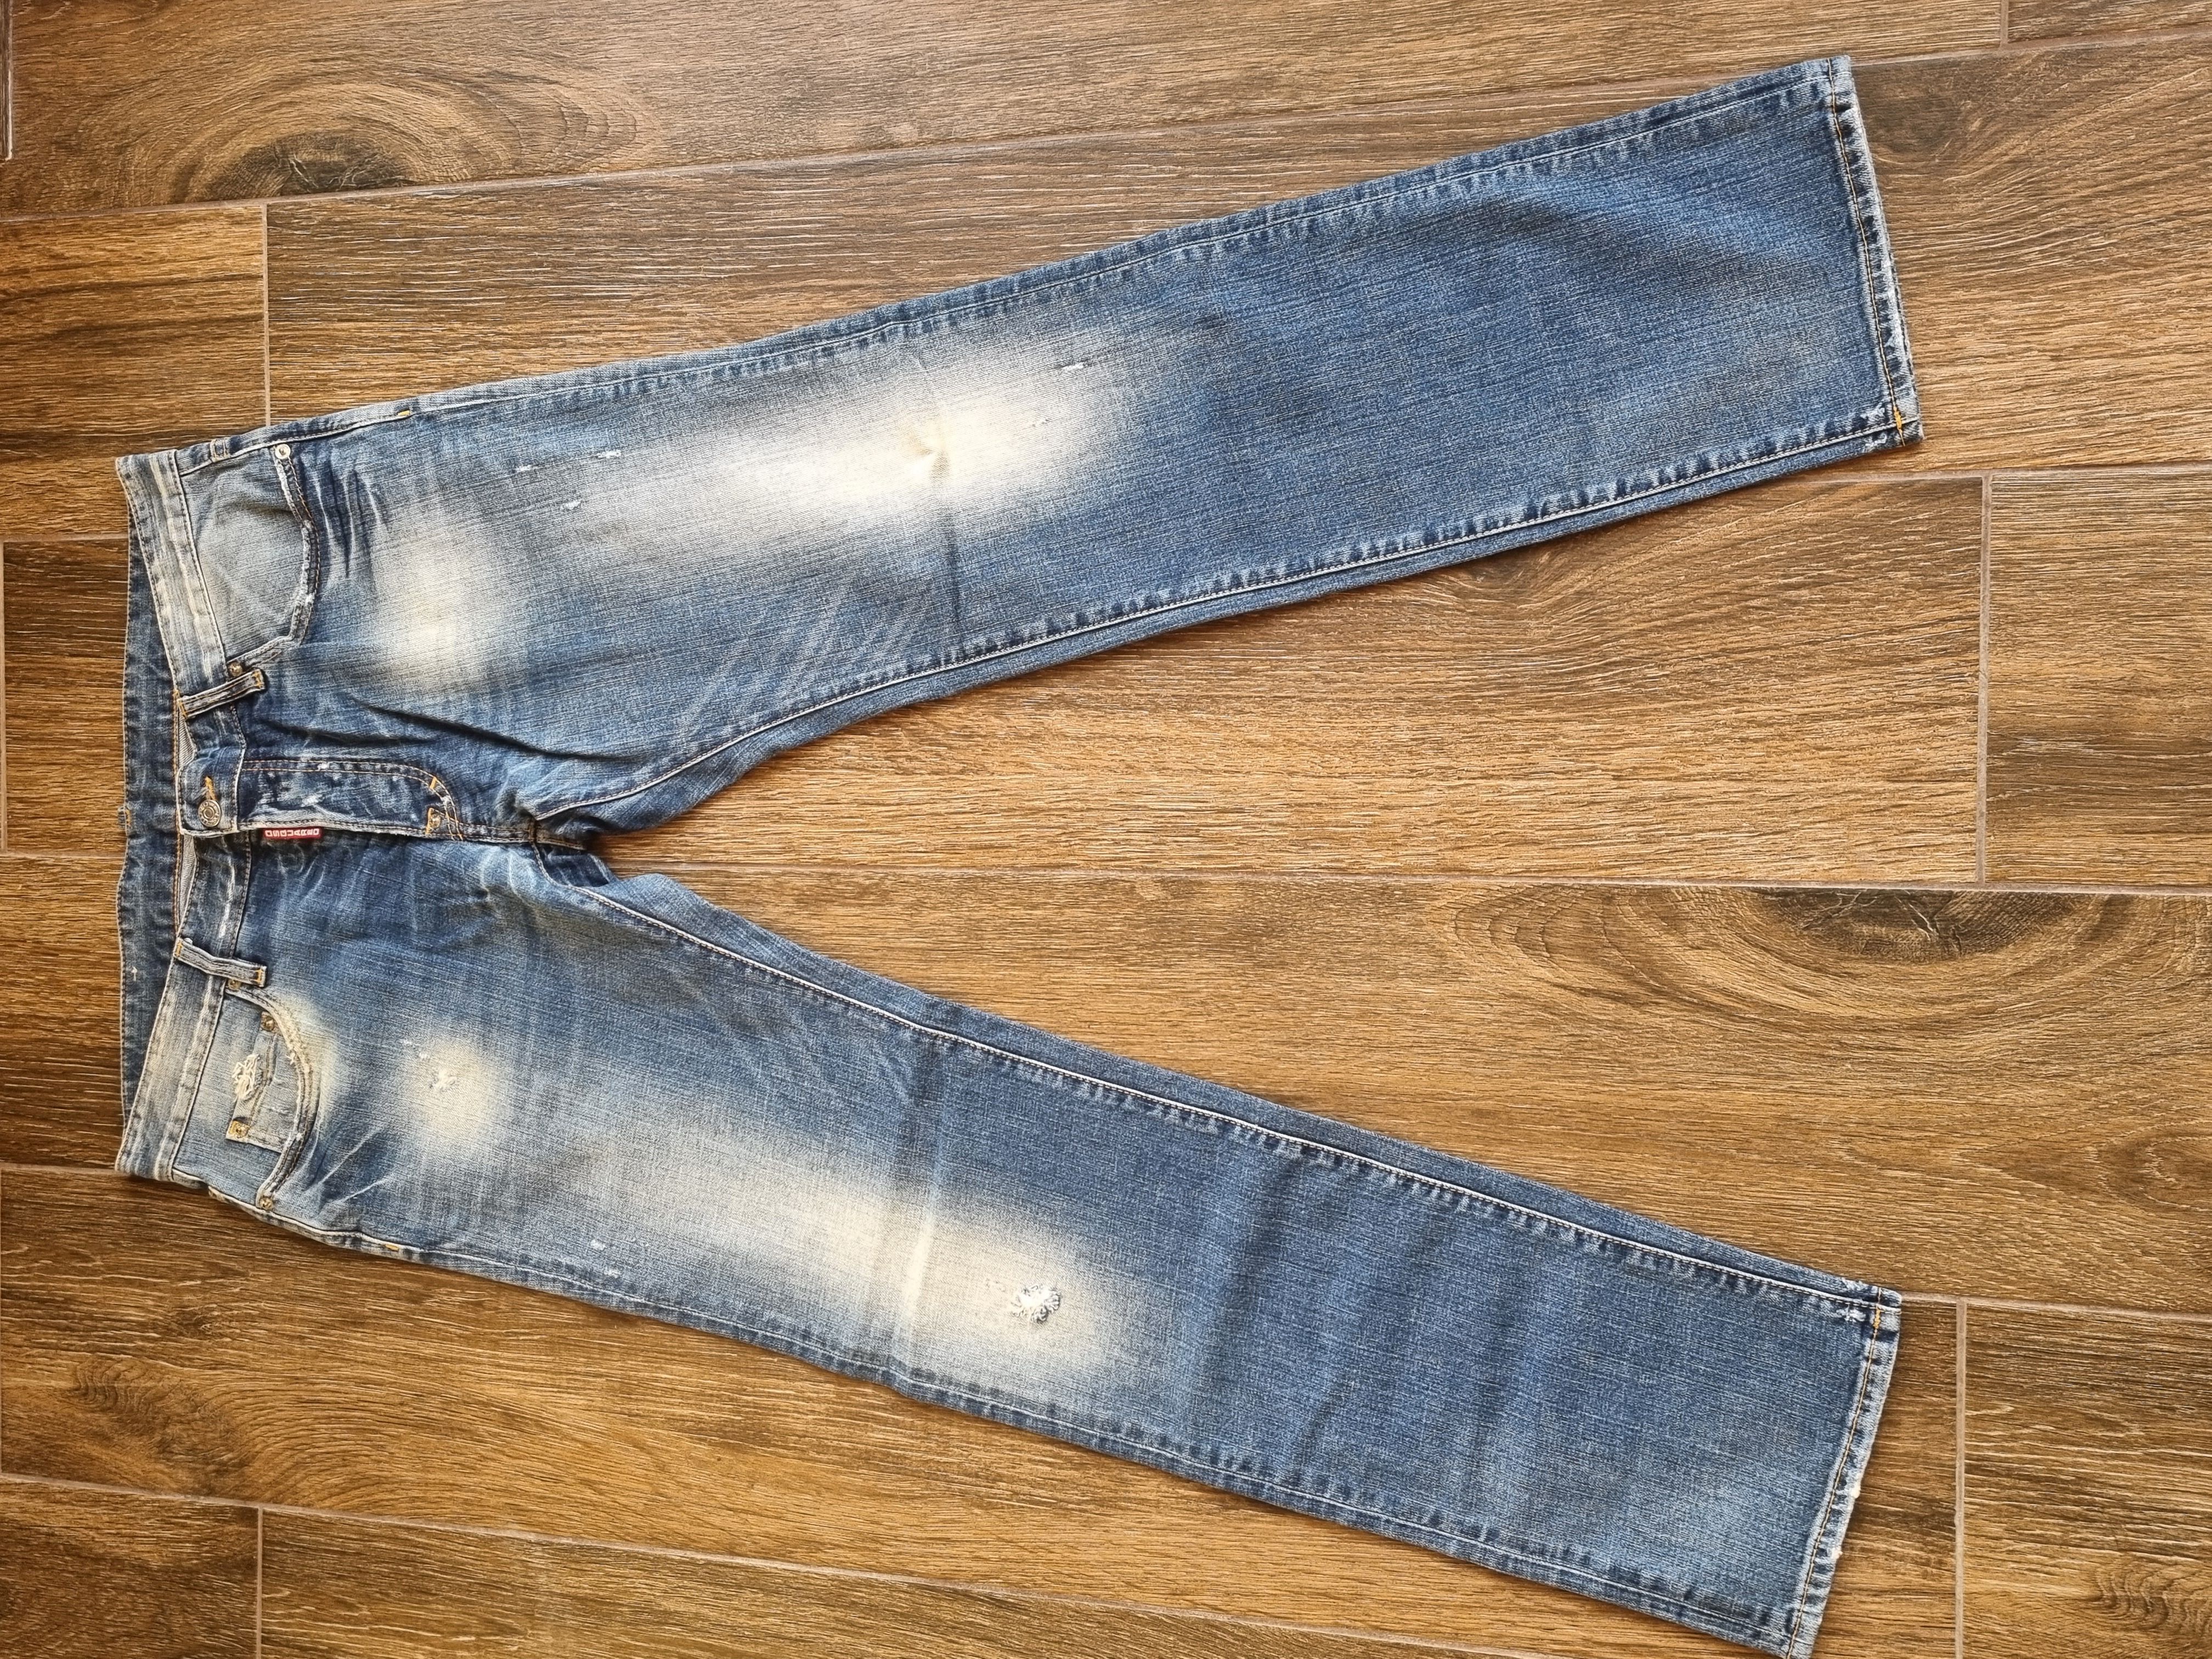 'It's A Hard Knock Life' stonewashed distressed jeans - 1